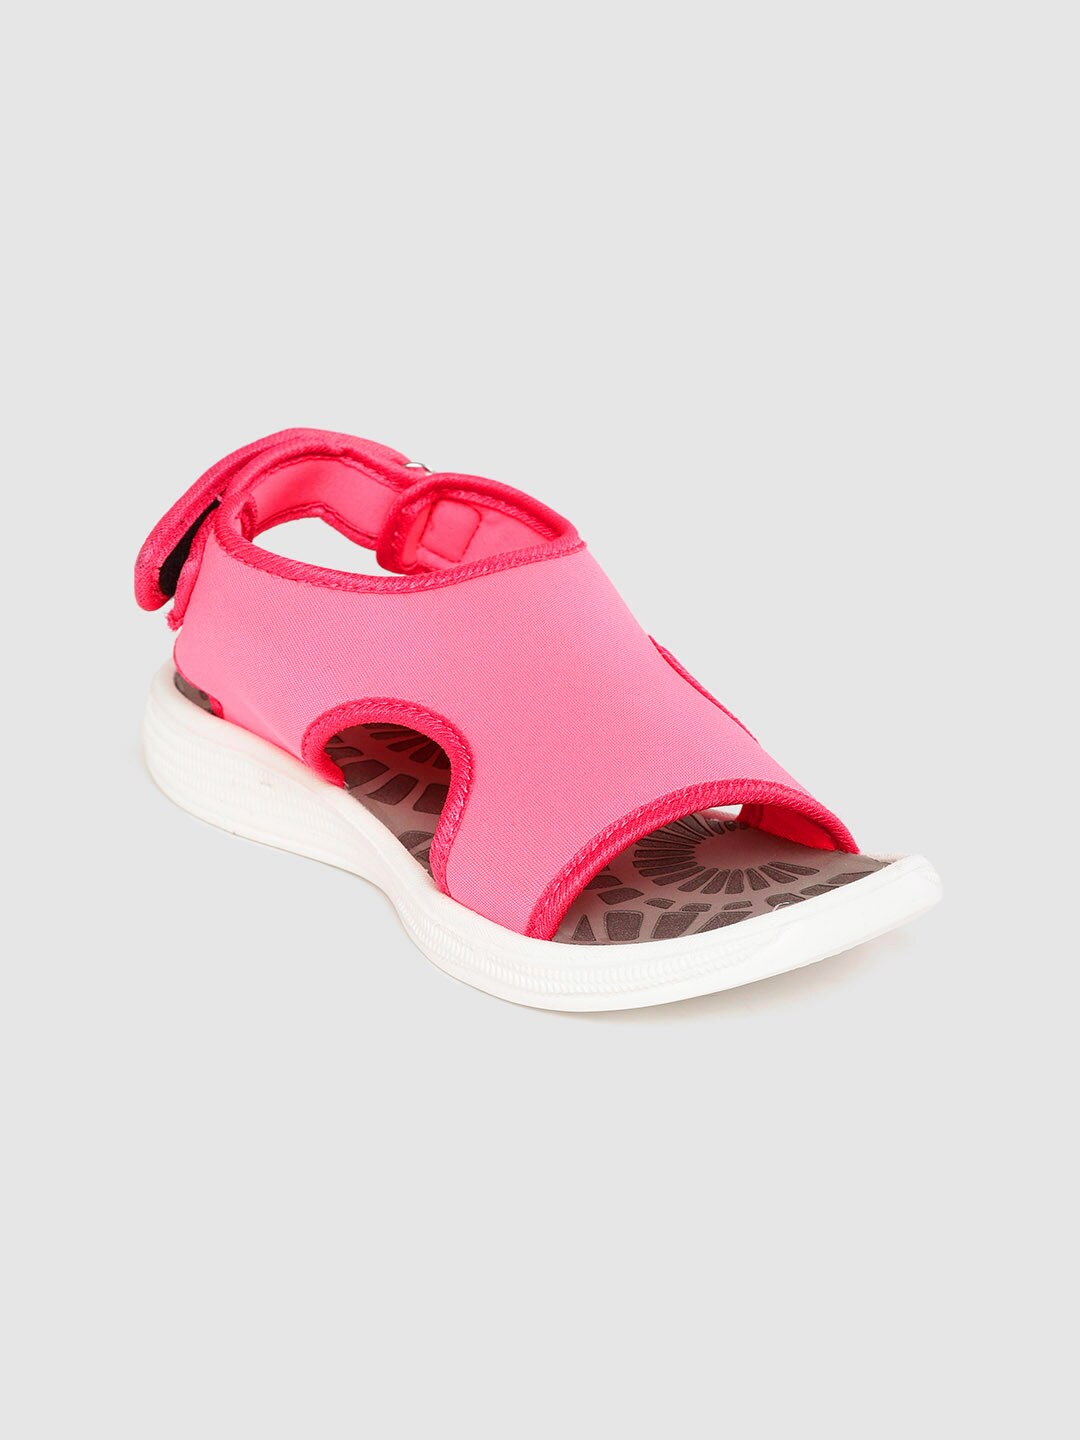 Kook N Keech Women Pink Solid Sports Sandals with Cut-Out Price in India